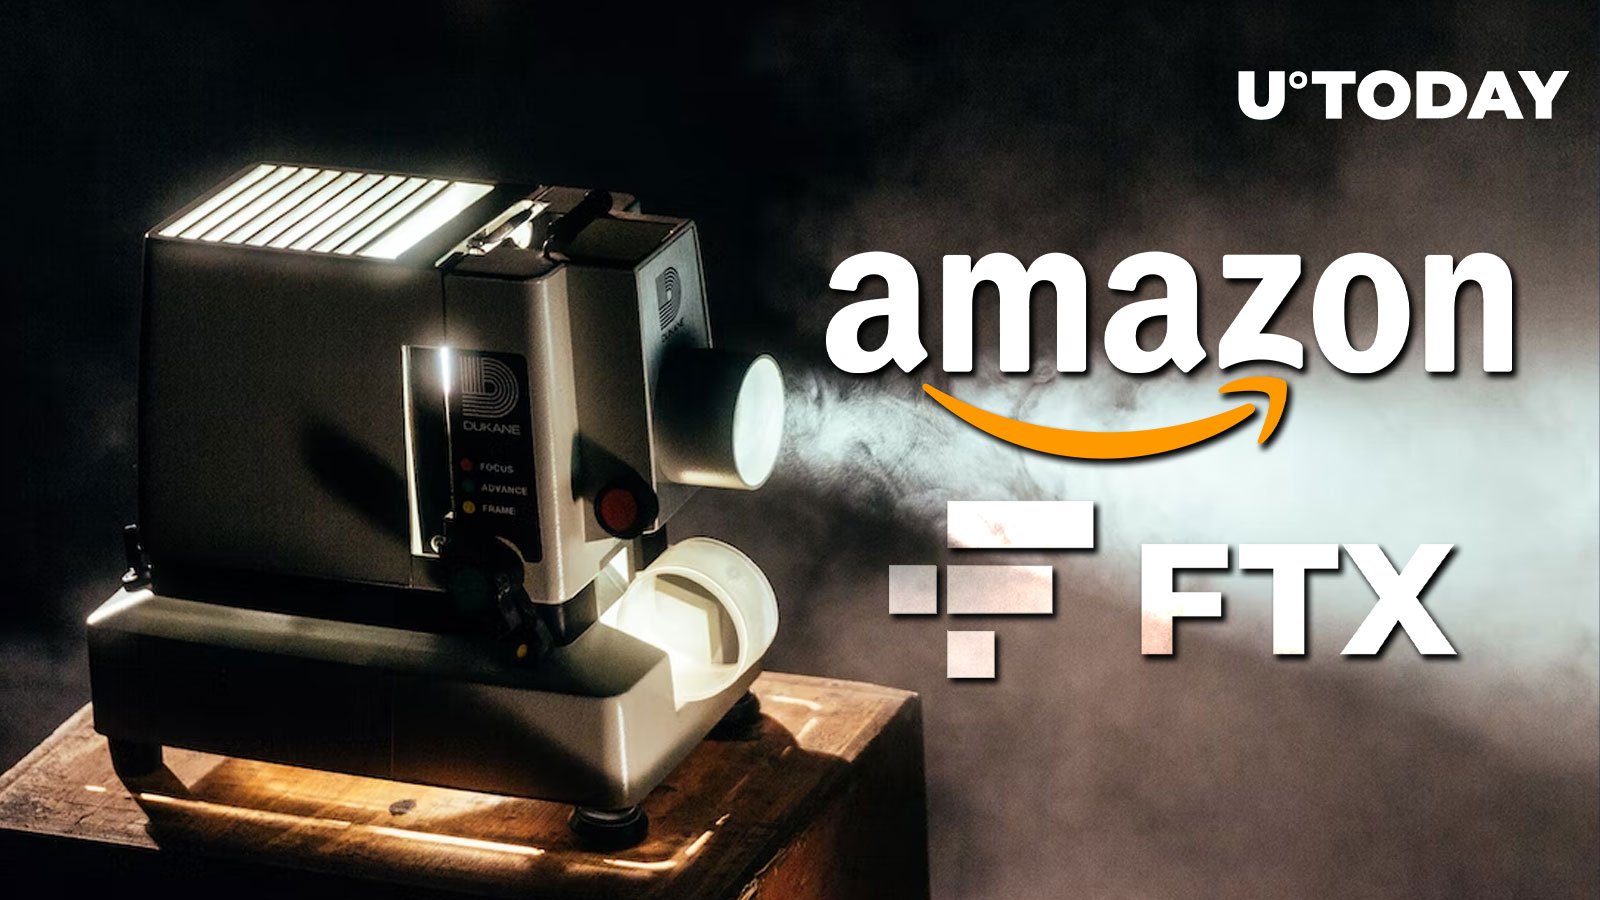 Amazon to Film TV Series About FTX Collapse